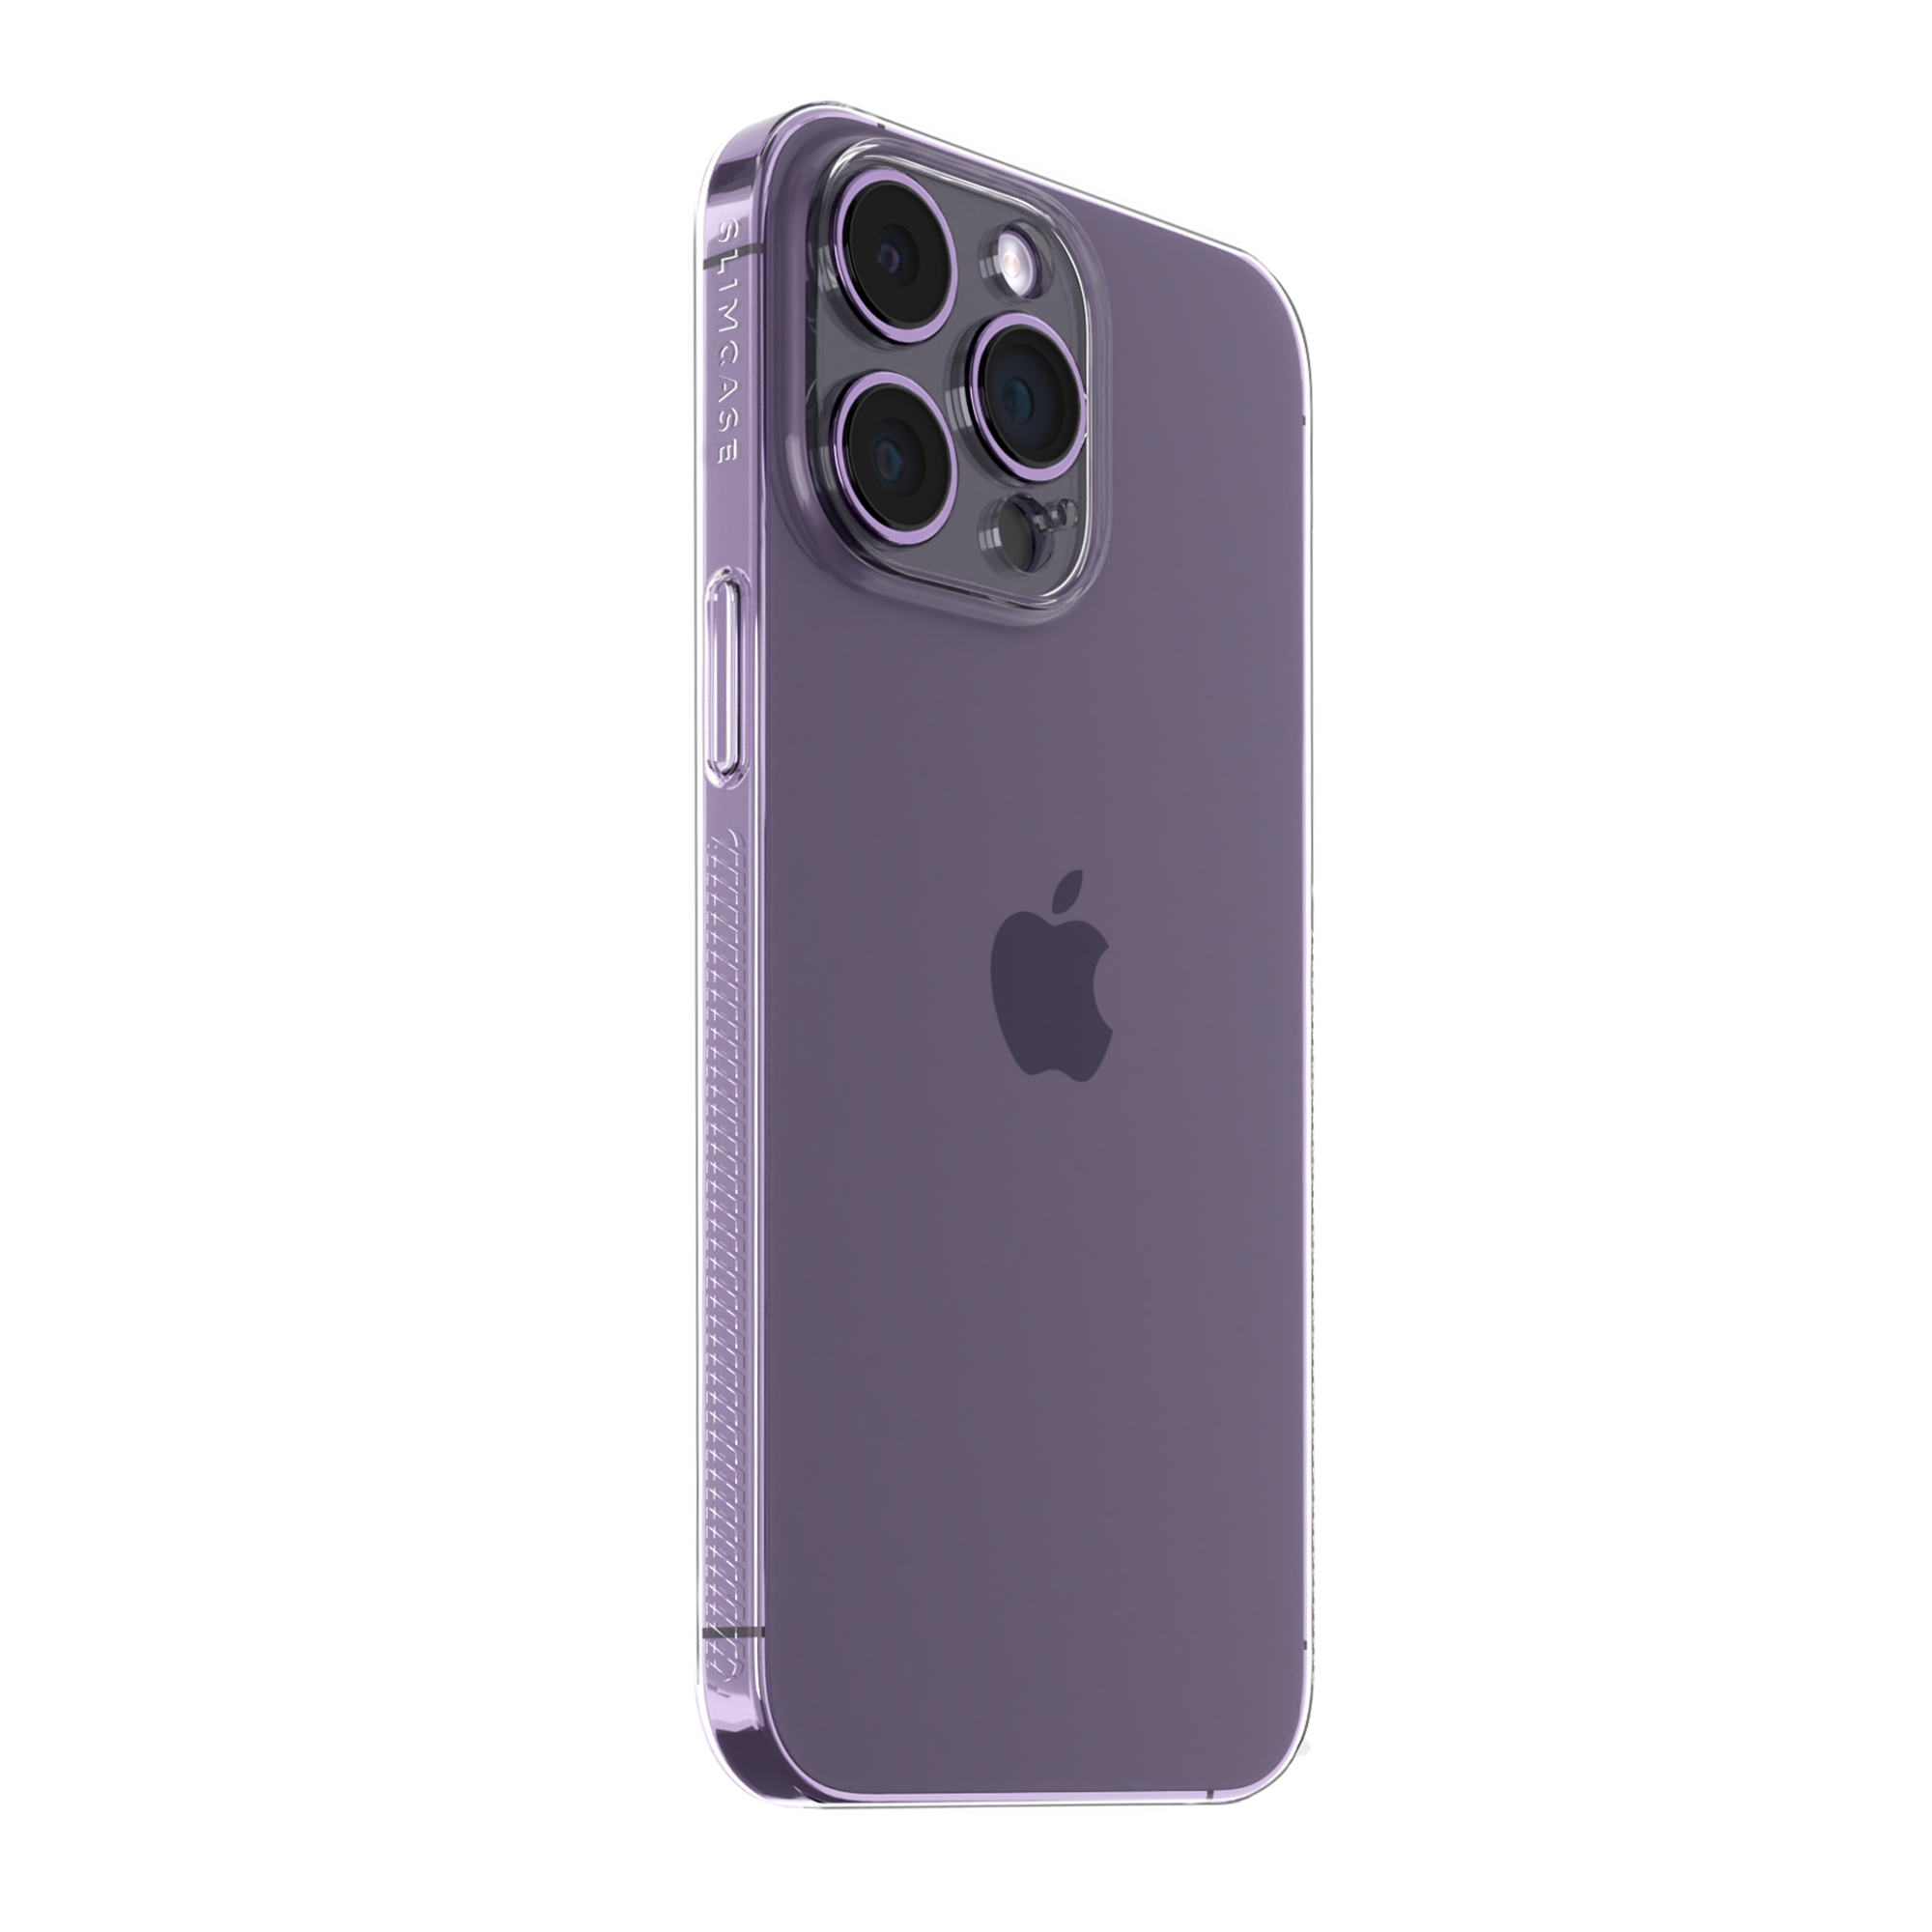 Slimcase Mobile Back Cover for iPhone 14 Pro Max